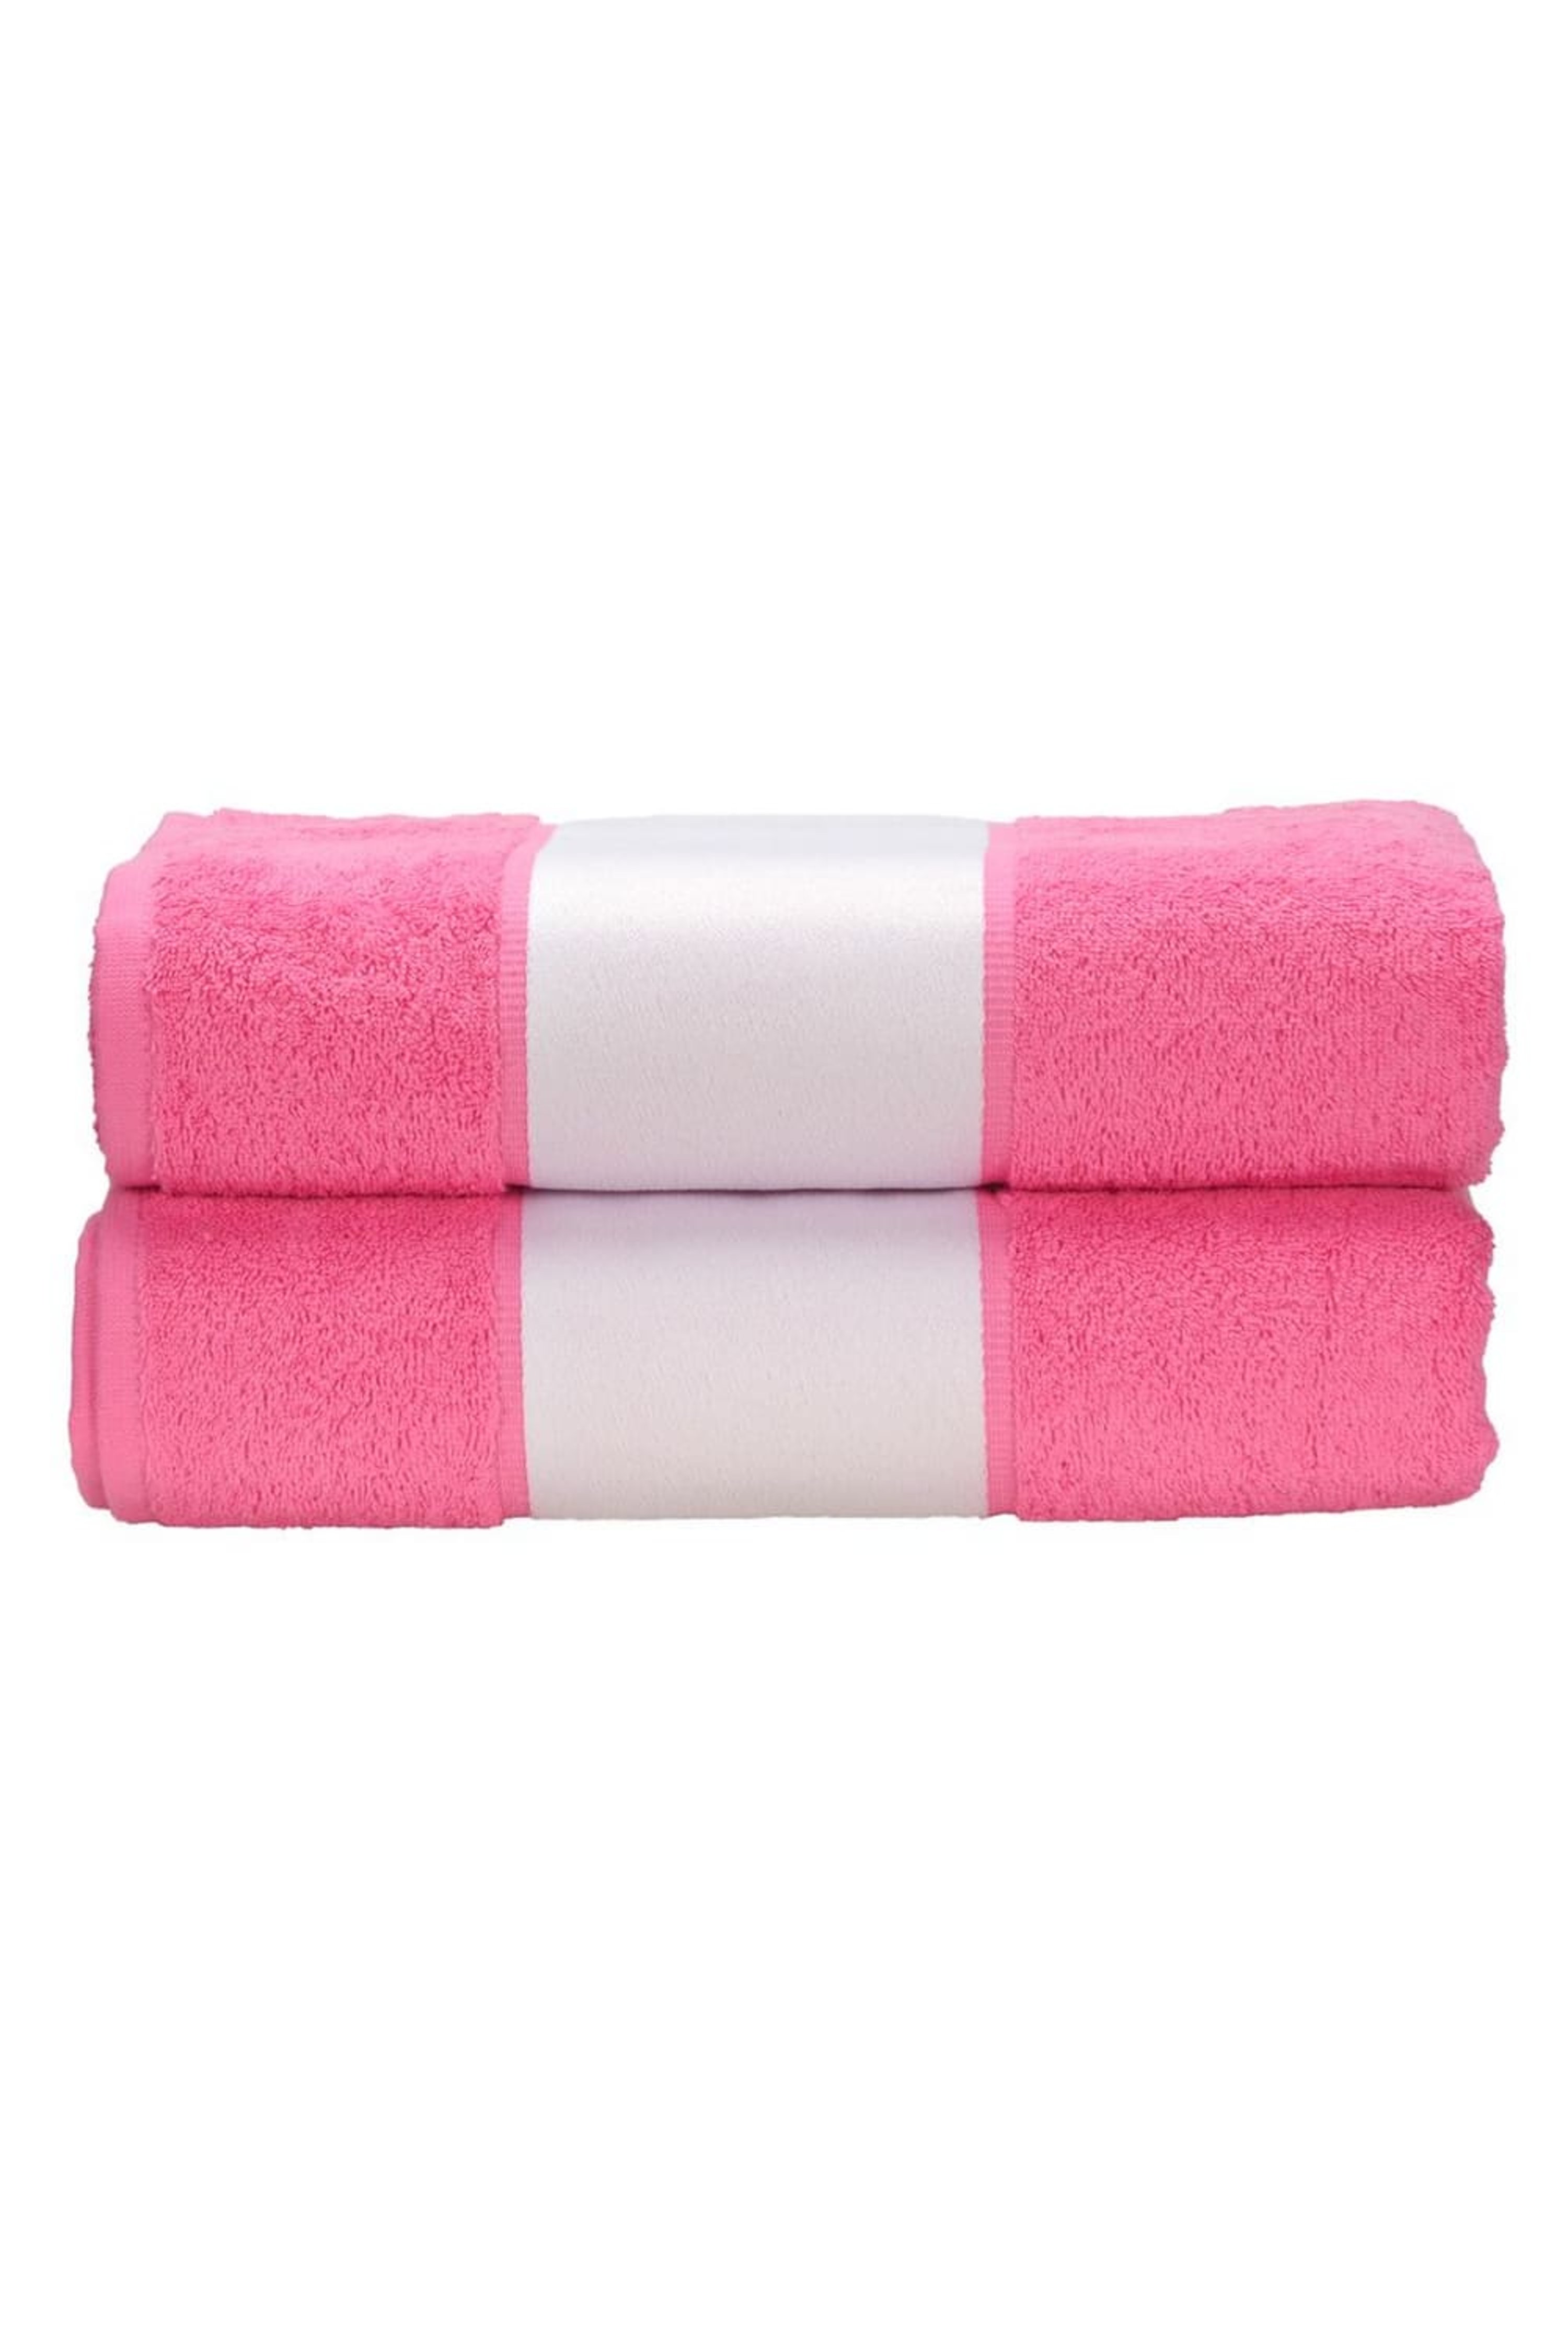 A&R TOWELS A&R TOWELS A&R TOWELS SUBLI-ME BATH TOWEL (PINK) (ONE SIZE)